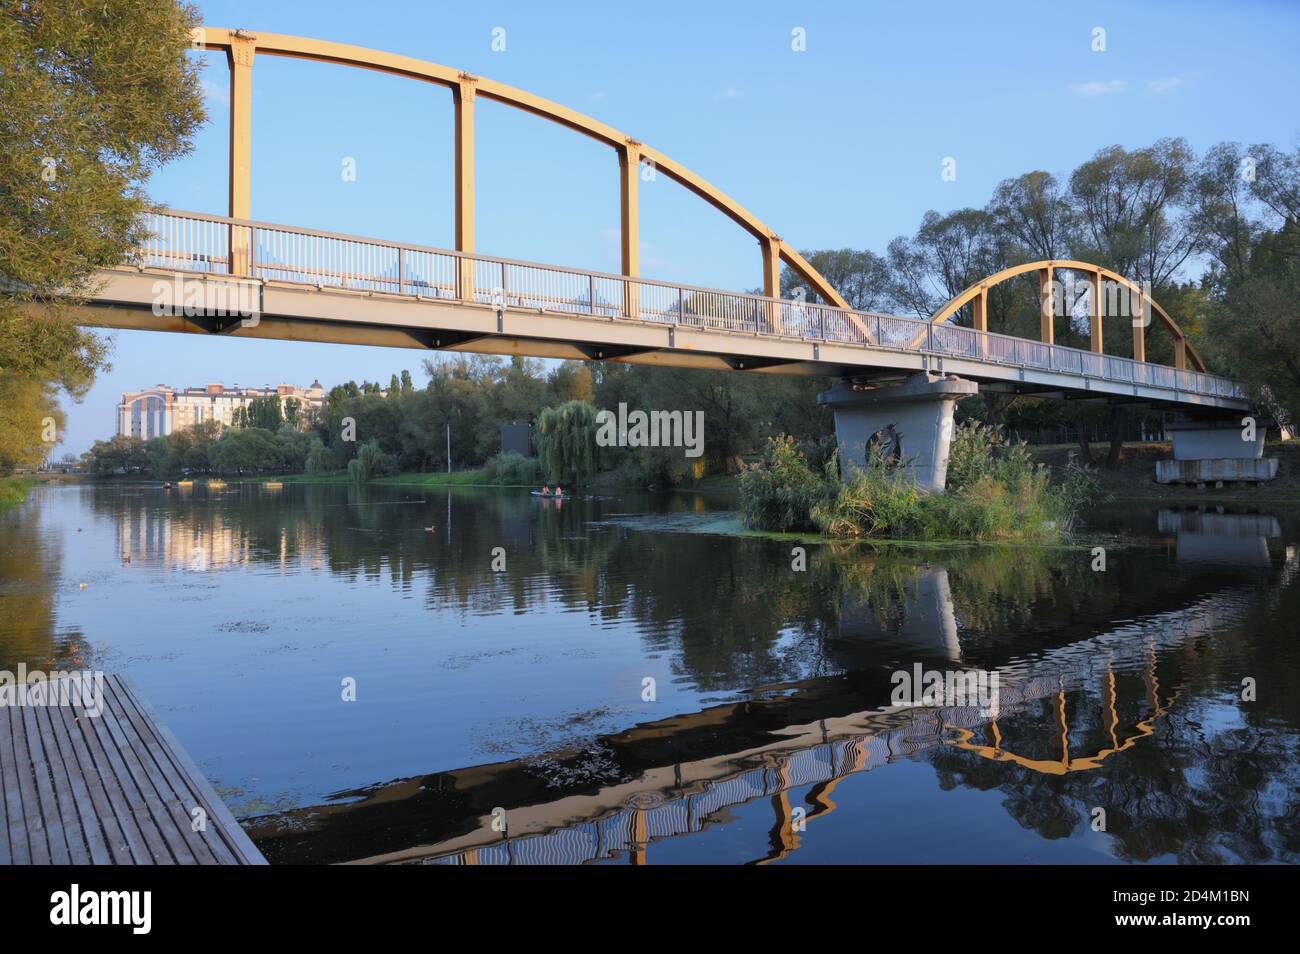 Pedestrian bridge across Vezelka river in Belgorod, Russia, known for the graffity Birds placed on the bridge support in 2014 Stock Photo